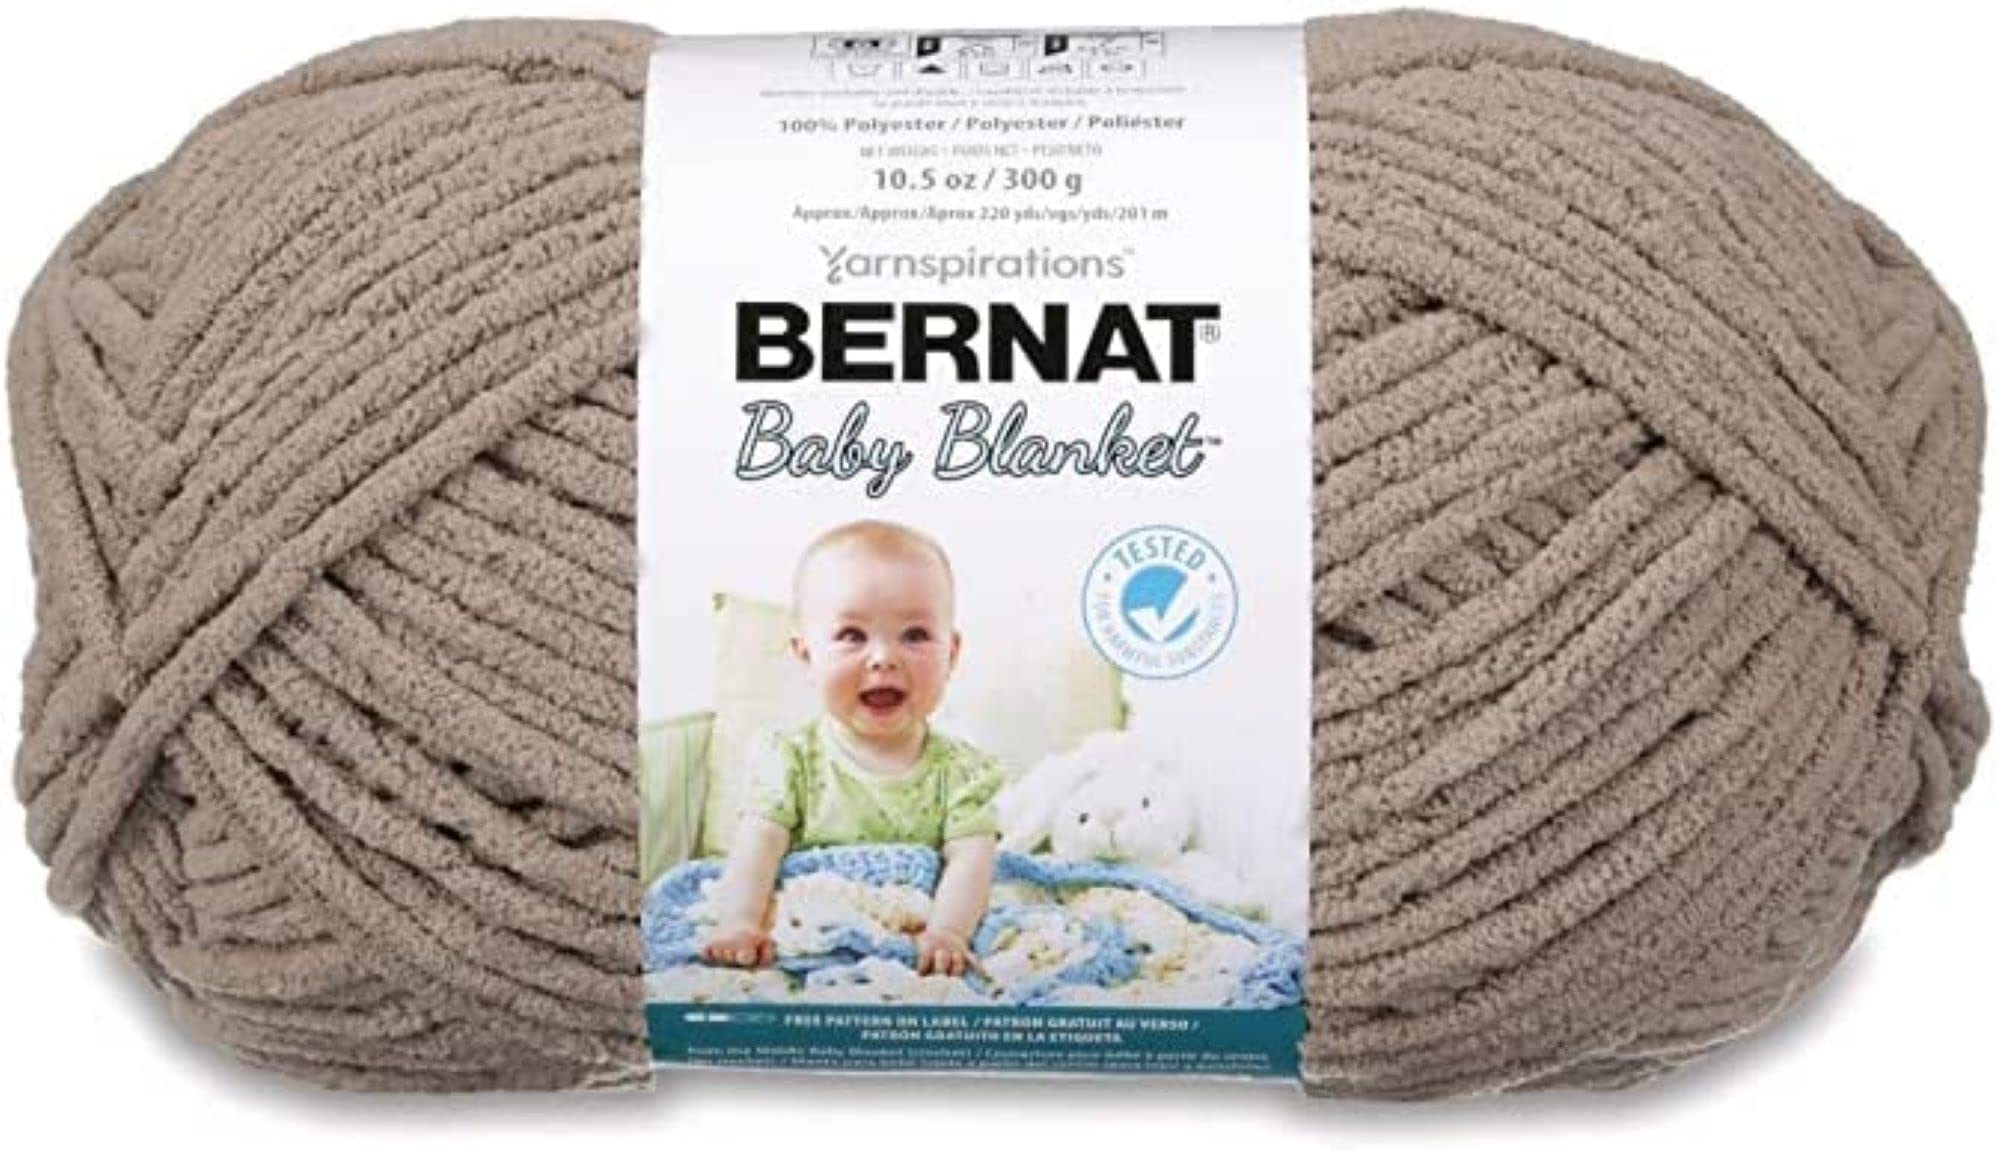 A Detailed Review of Bernat Big Ball Baby Sport Ombre Yarn